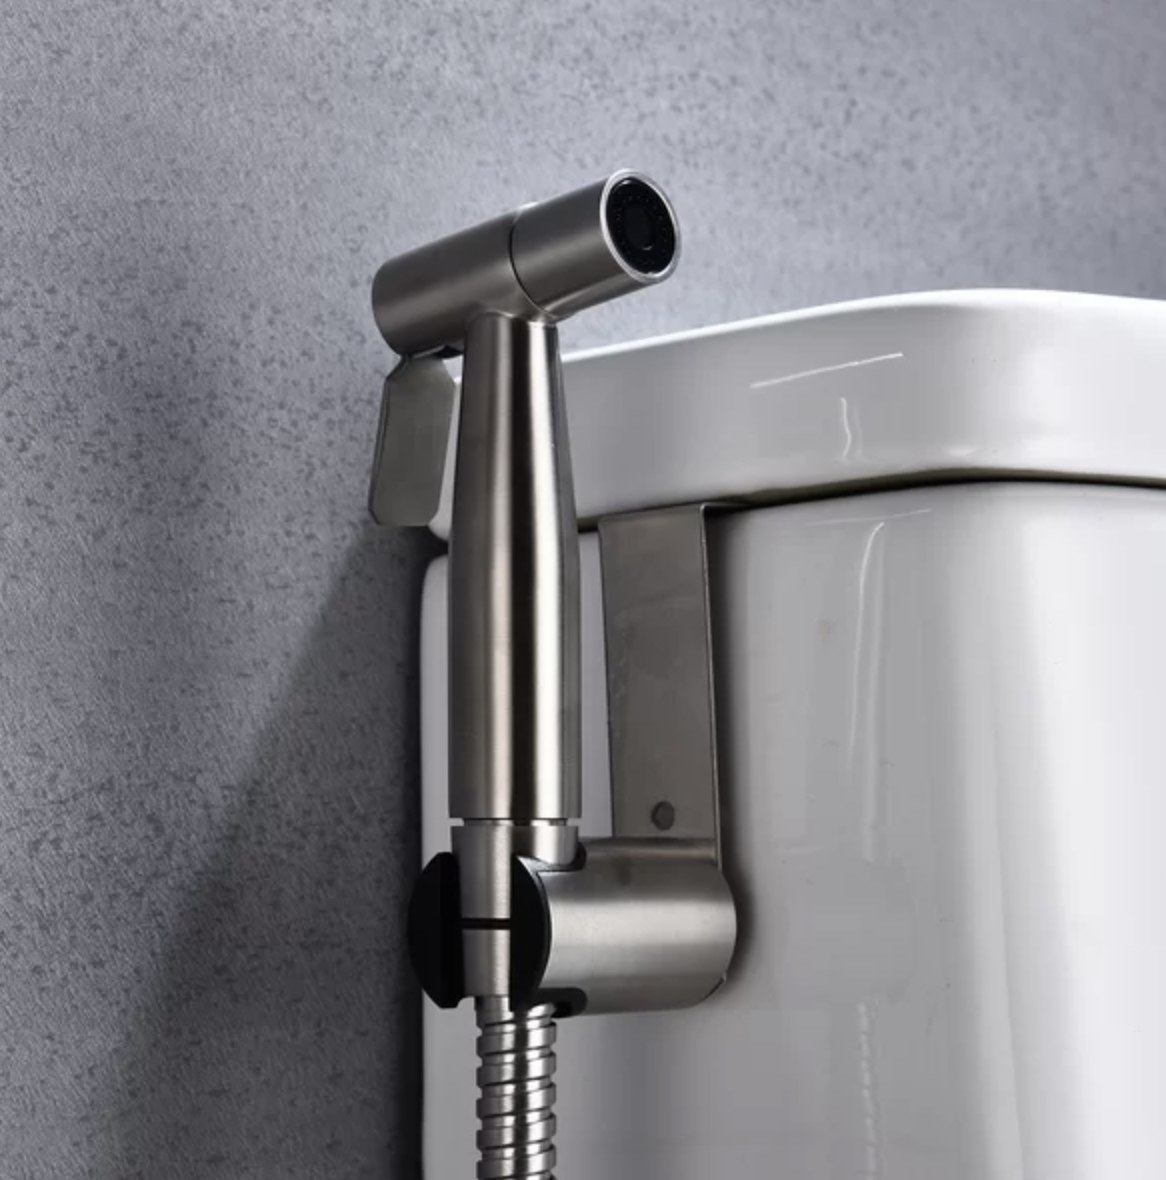 The stainless steel handheld bidet is hooked up to the side of the white toilet